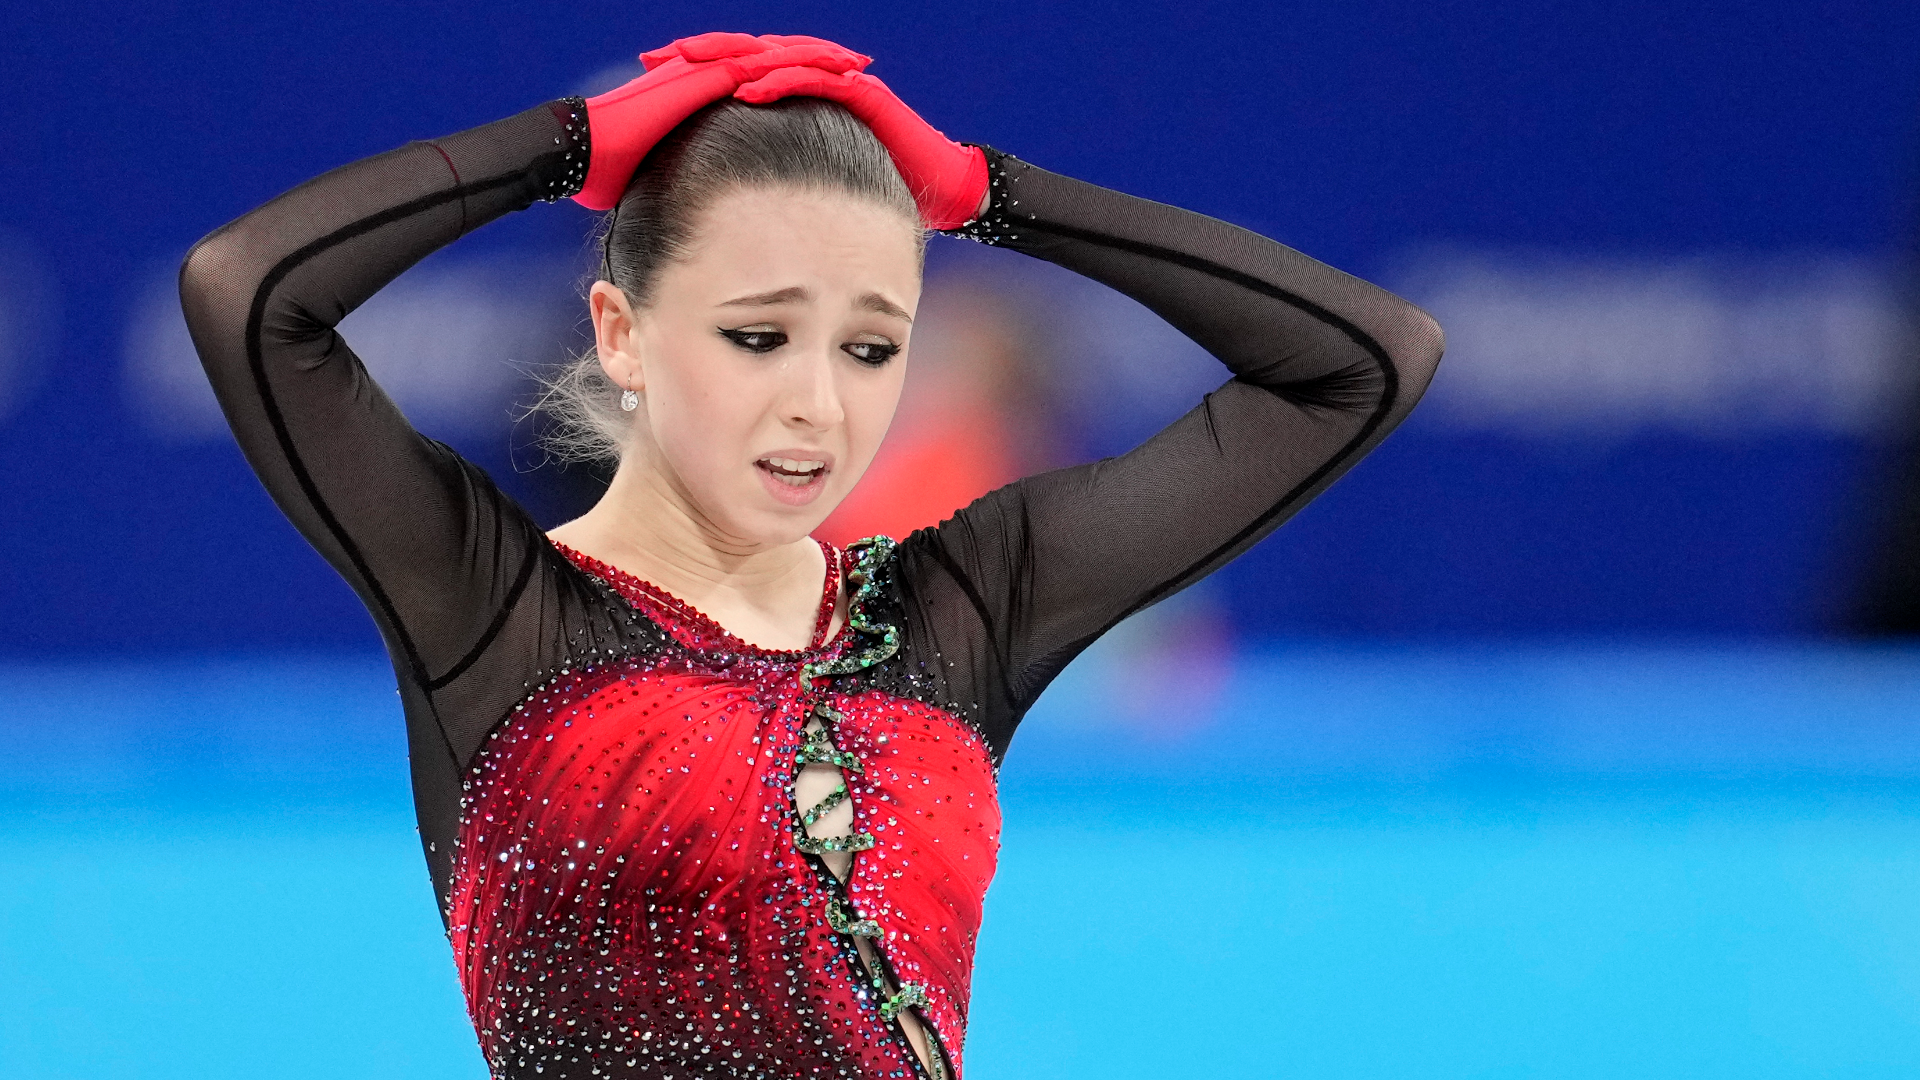 Olympics 2022: Why Kamila Valieva and Russia's figure skating team are so  controversial - Vox